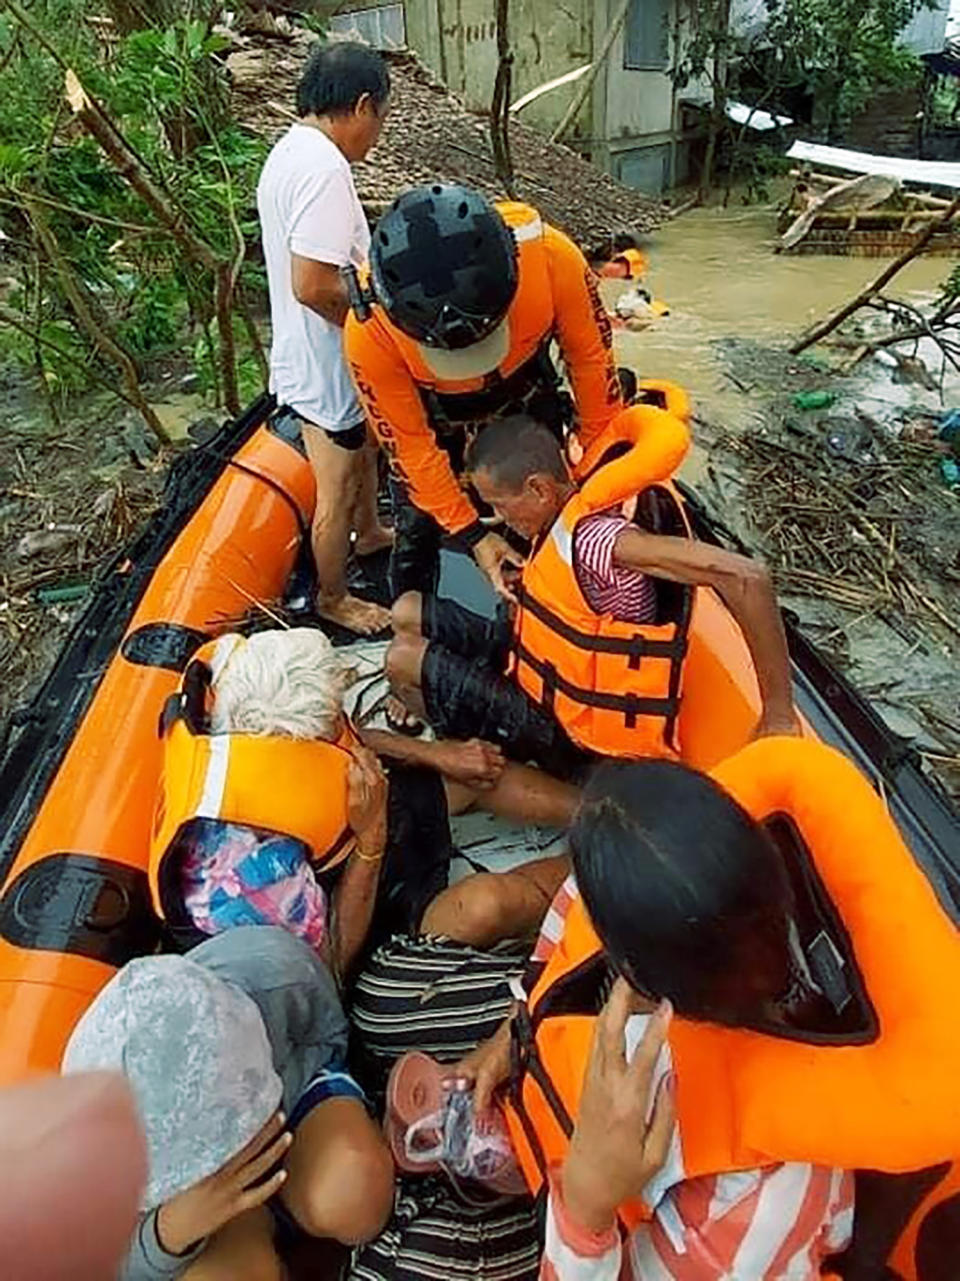 In this photo provided by the Philippine Coast Guard, rescuers assist residents who were trapped in their homes after floodwaters caused by Typhoon Rai inundated their village in Negros Occidental, central Philippines on Friday, Dec. 17, 2021. The strong typhoon engulfed villages in floods that trapped residents on roofs, toppled trees and knocked out power in southern and central island provinces, where more than 300,000 villagers had fled to safety before the onslaught, officials said. (Philippine Coast Guard via AP)